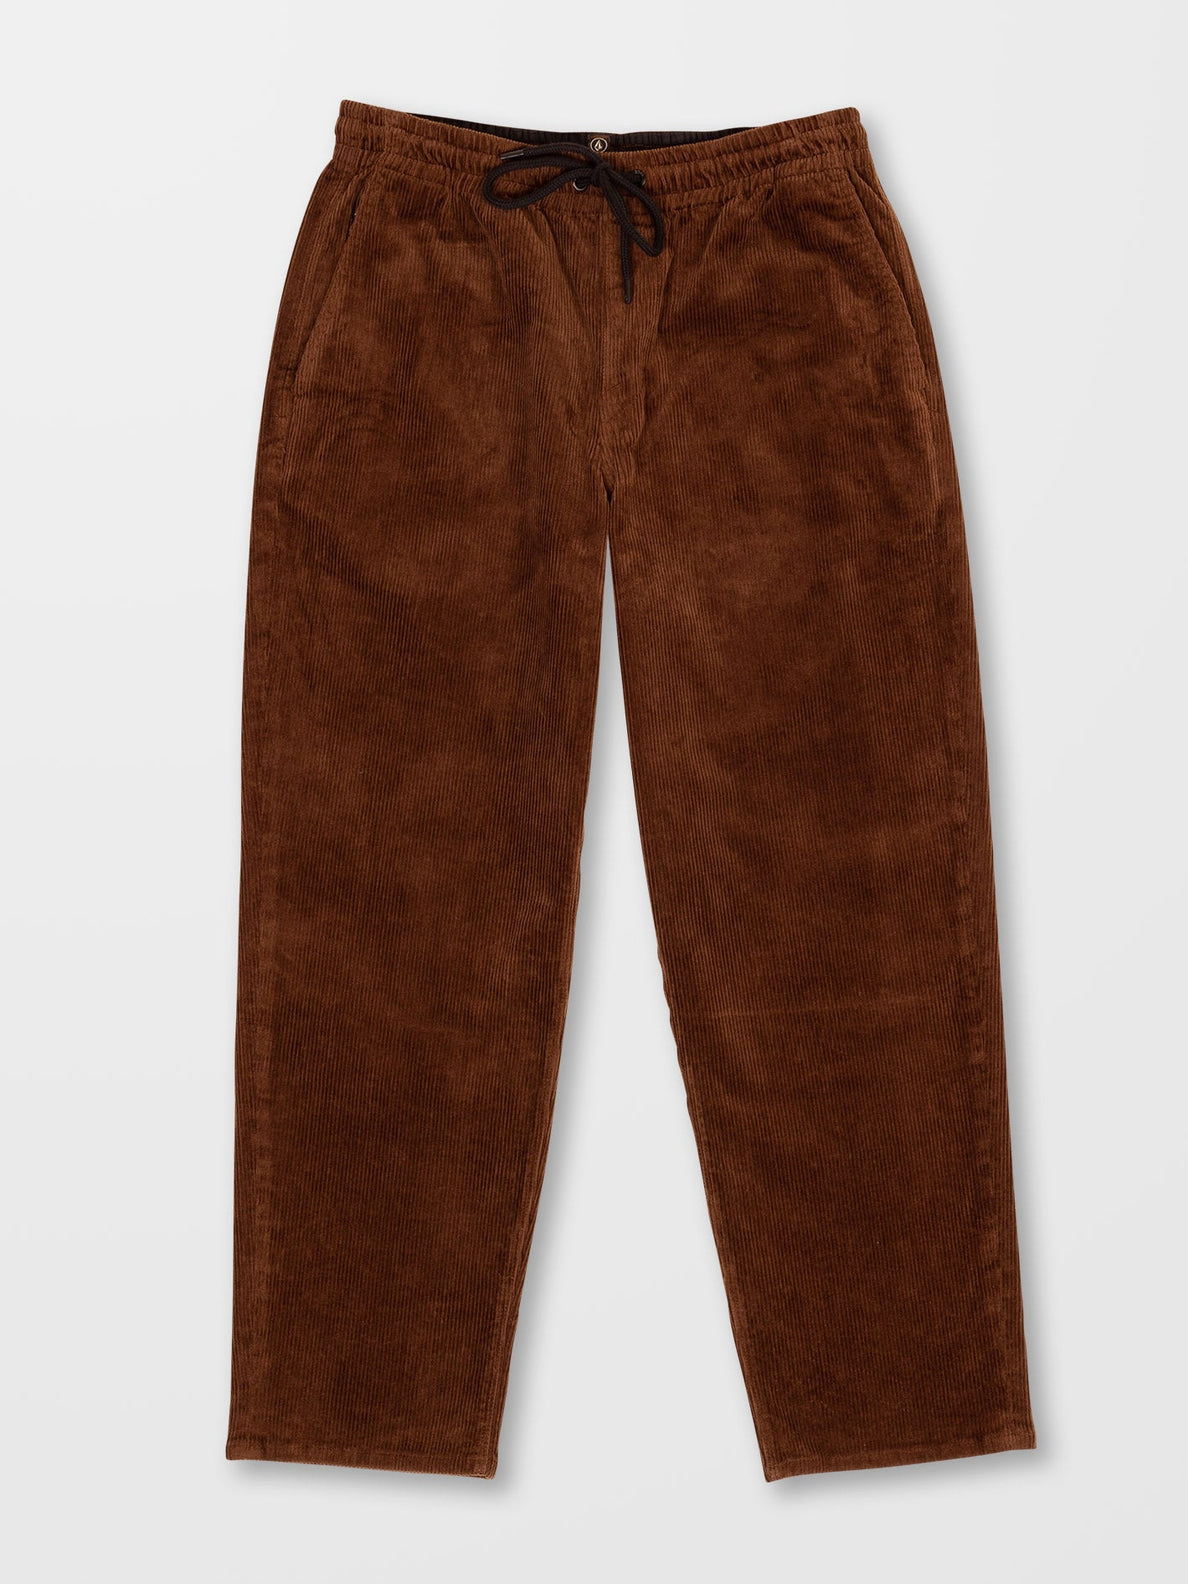 Outer Spaced Corduroy Trousers - BURRO BROWN (A1232205_BRR) [1]